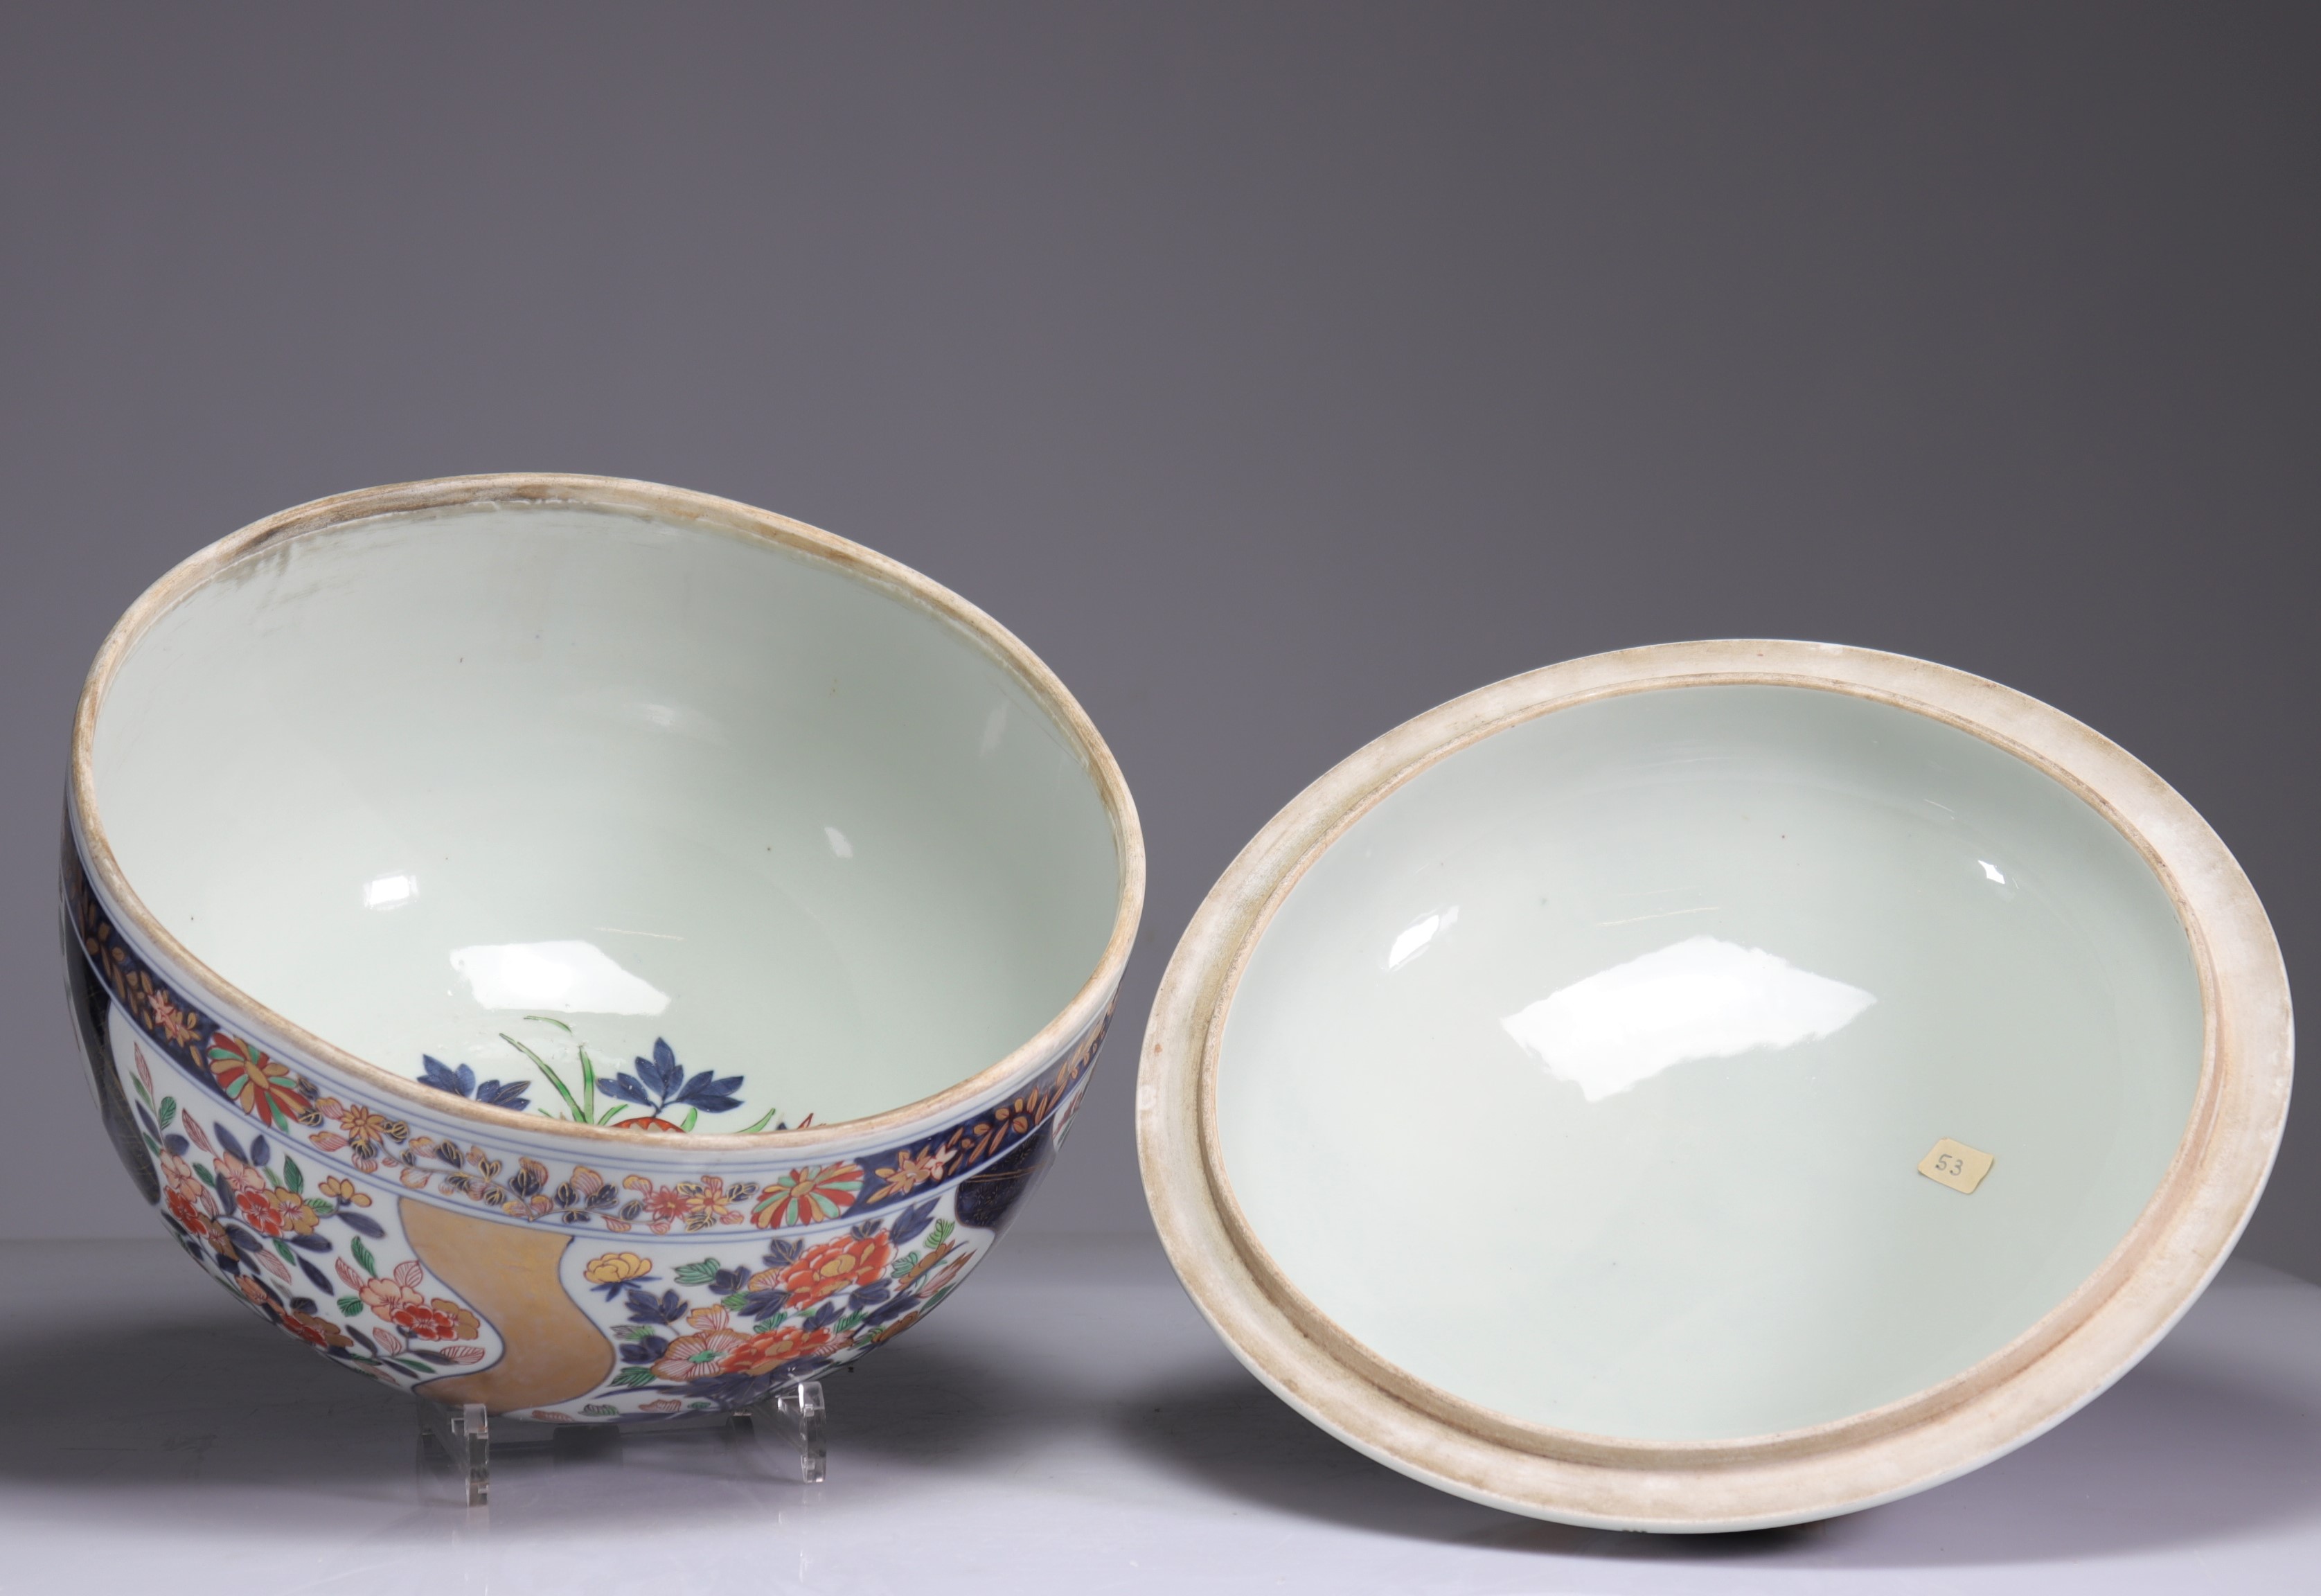 Imposing covered bowl in 18th century Japanese porcelain - Image 6 of 7